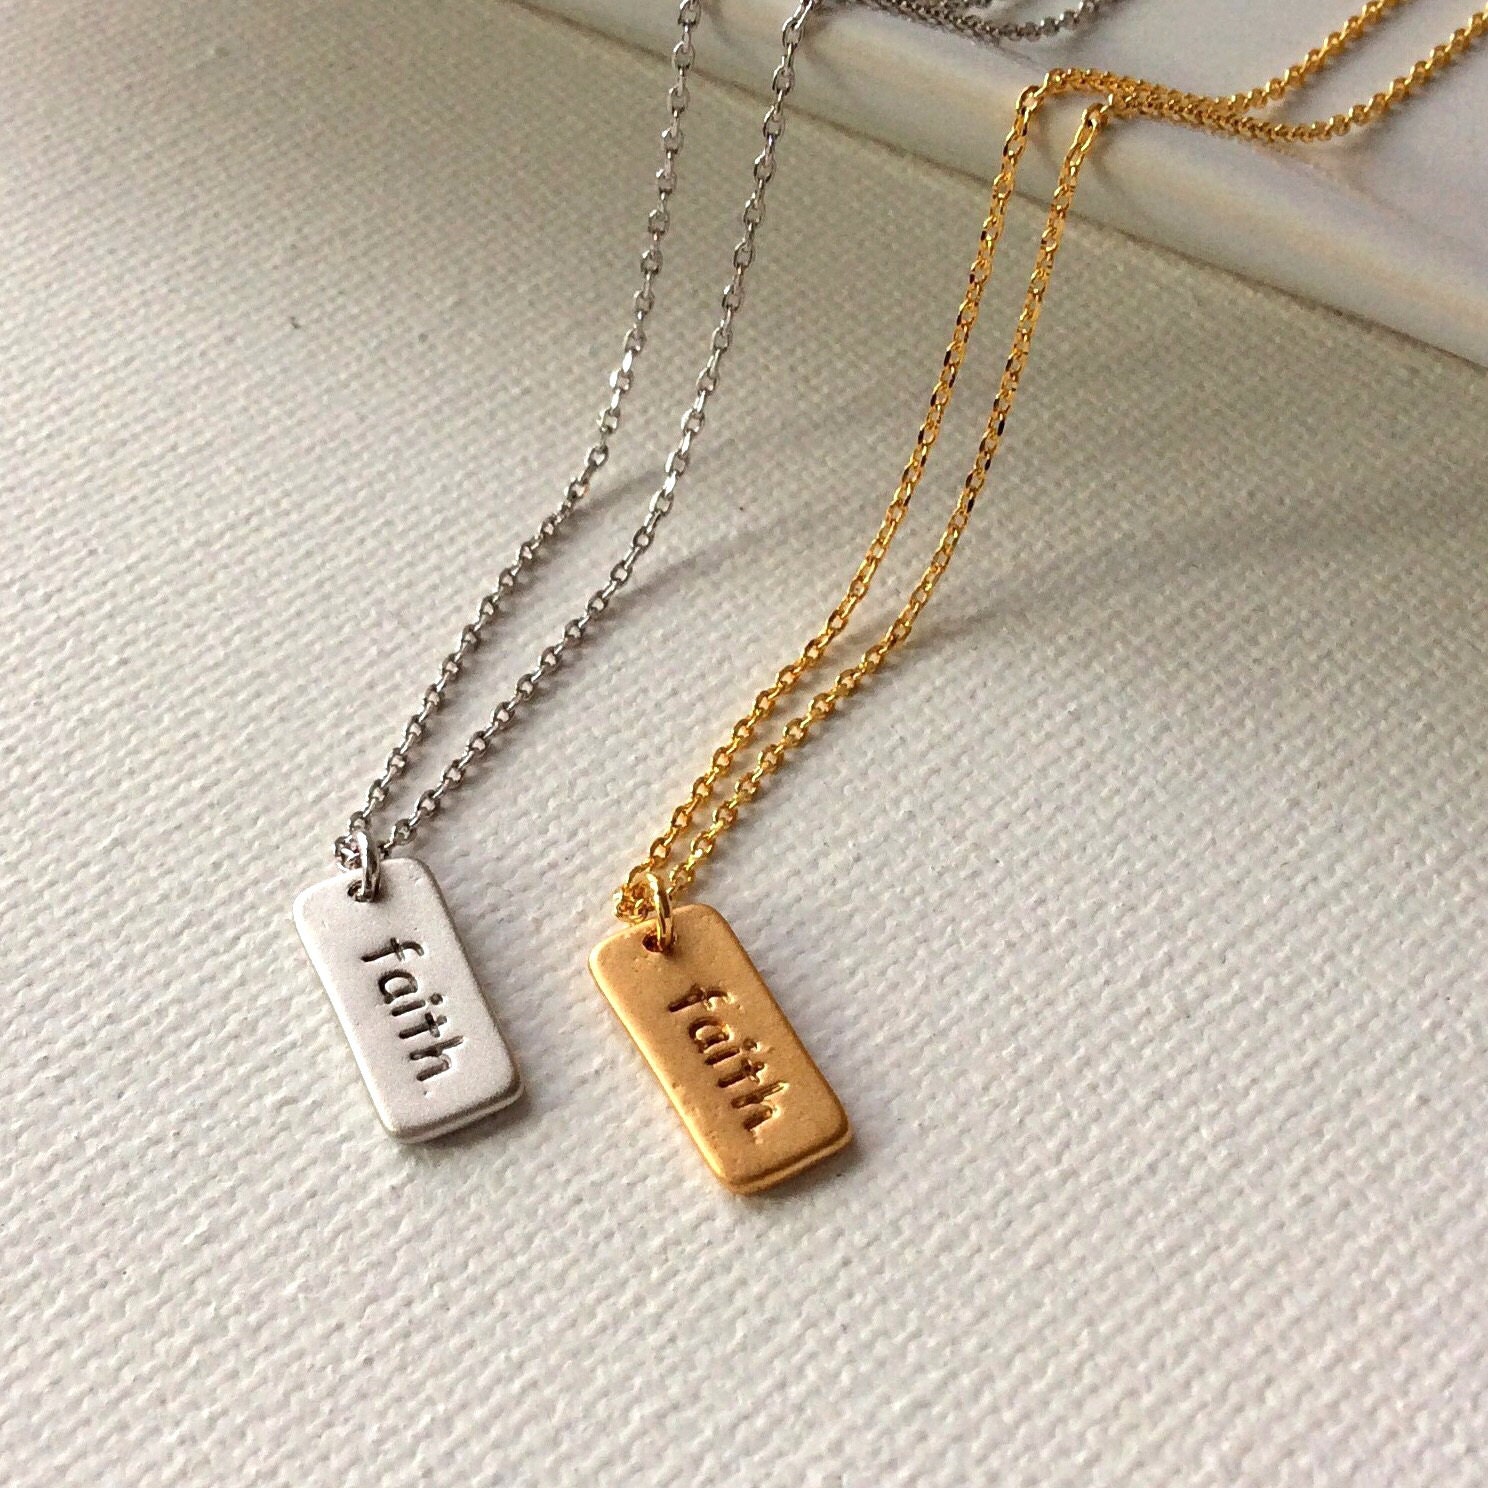 Faith Necklace, matte silver tag necklace, faith pendant necklace, matte gold charm necklace, Gifts for her, best friend necklace